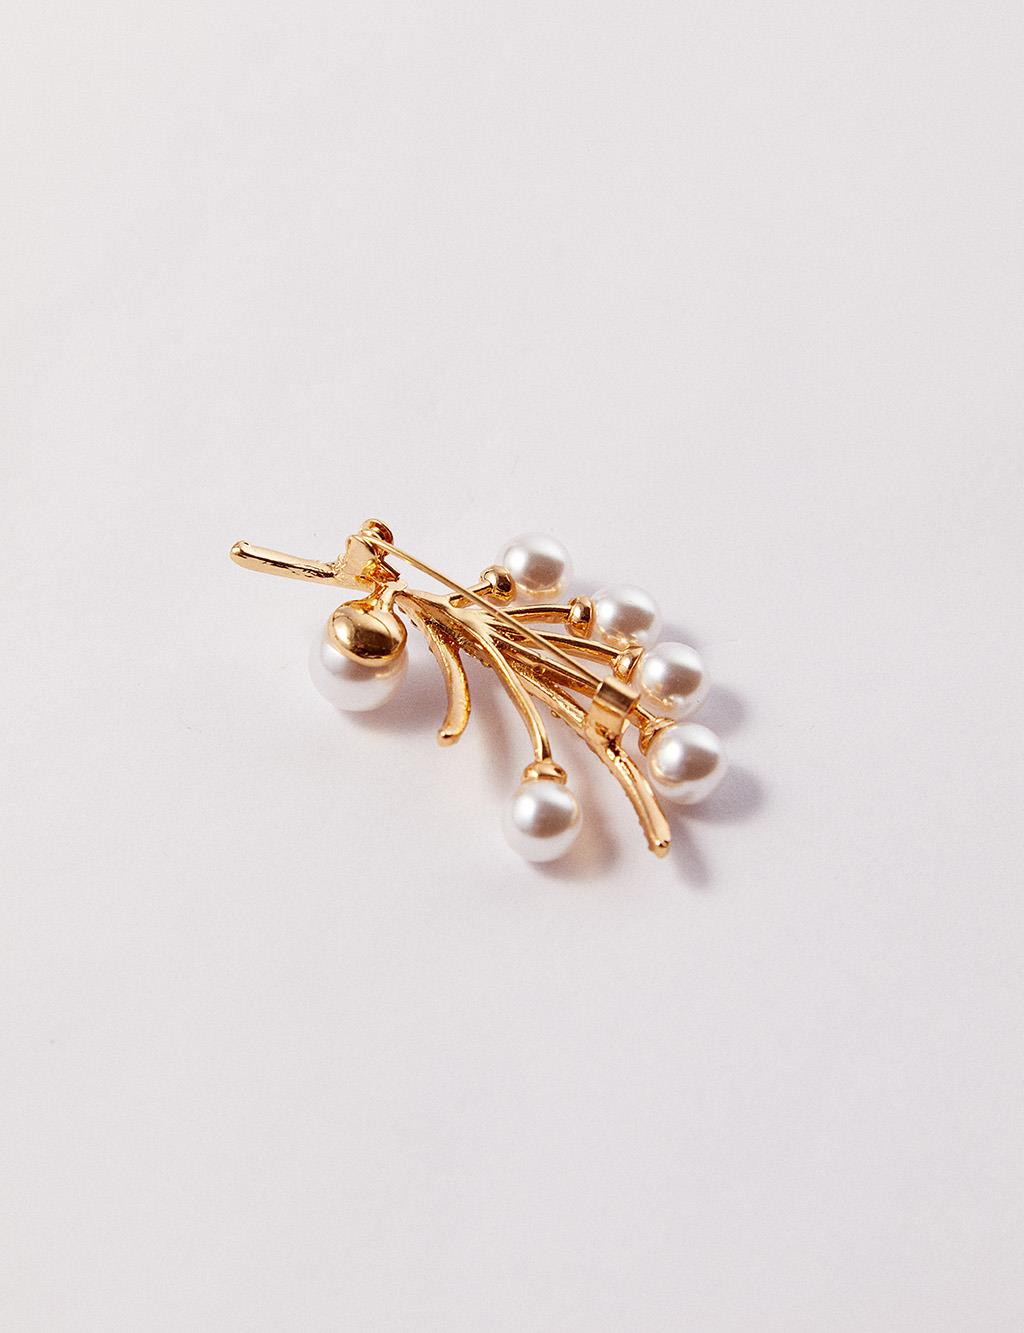 Pearl Tree Branch Figured Brooch Gold Color